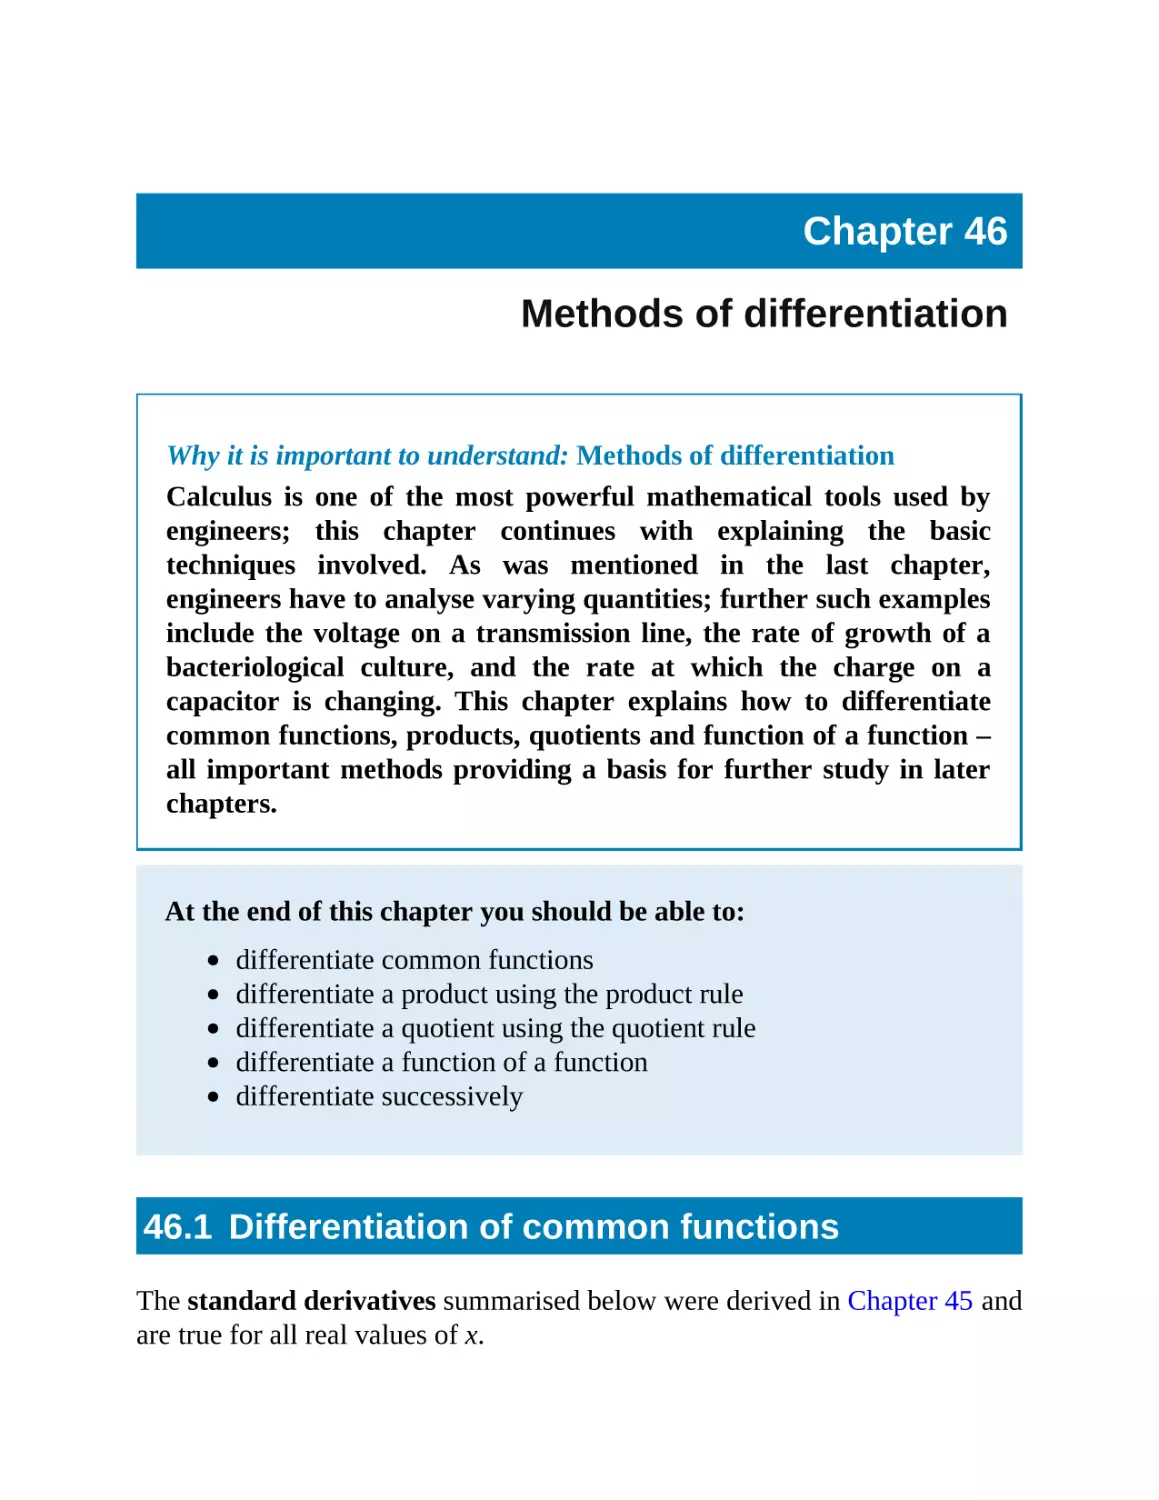 46 Methods of differentiation
46.1 Differentiation of common functions